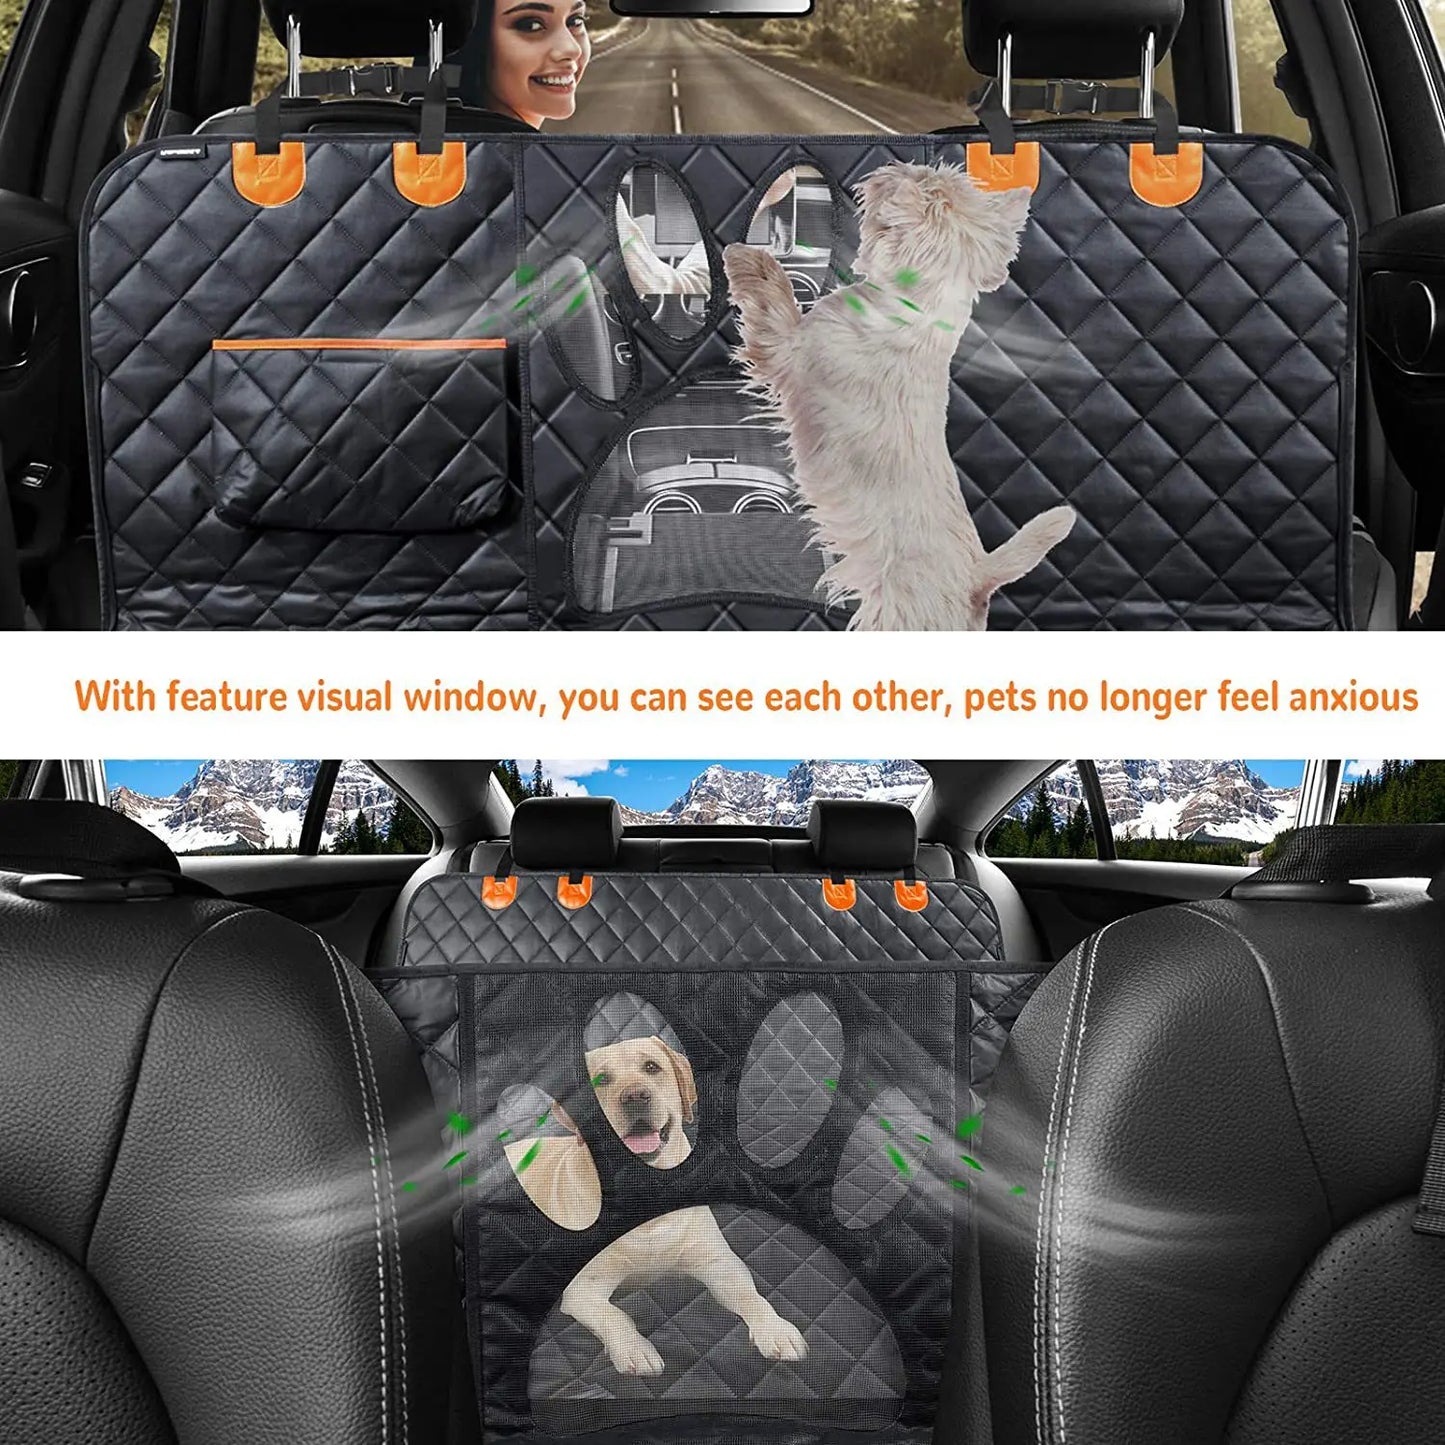 Thickened Dog Car Rear Seat Cover for Scratches Prevention Waterproof